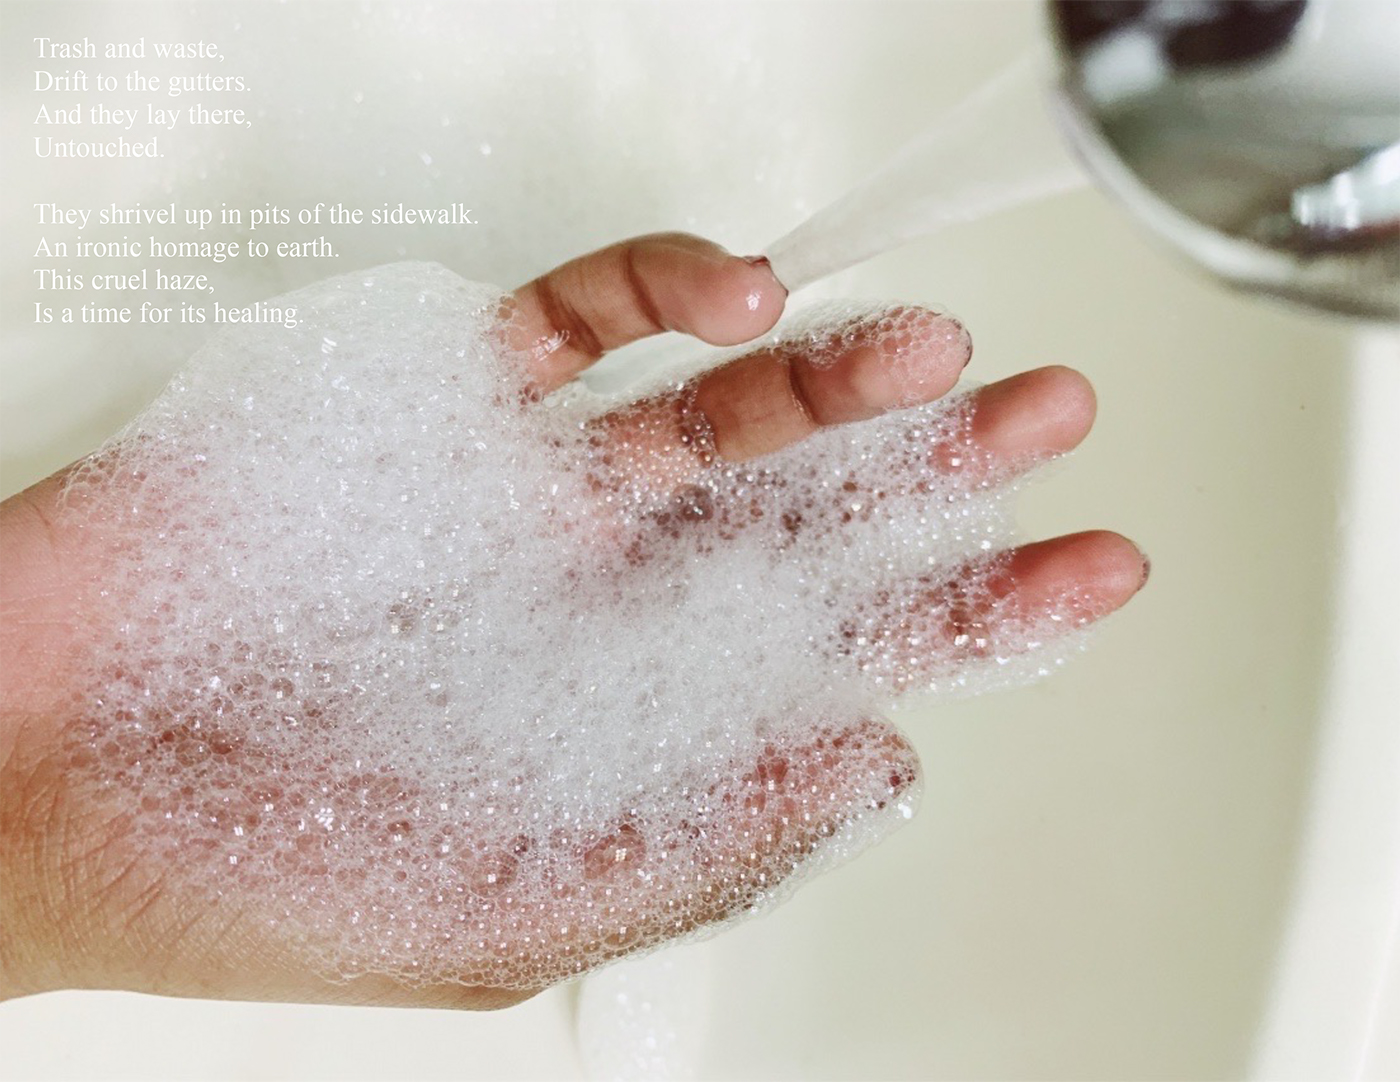 photo of hand being washed